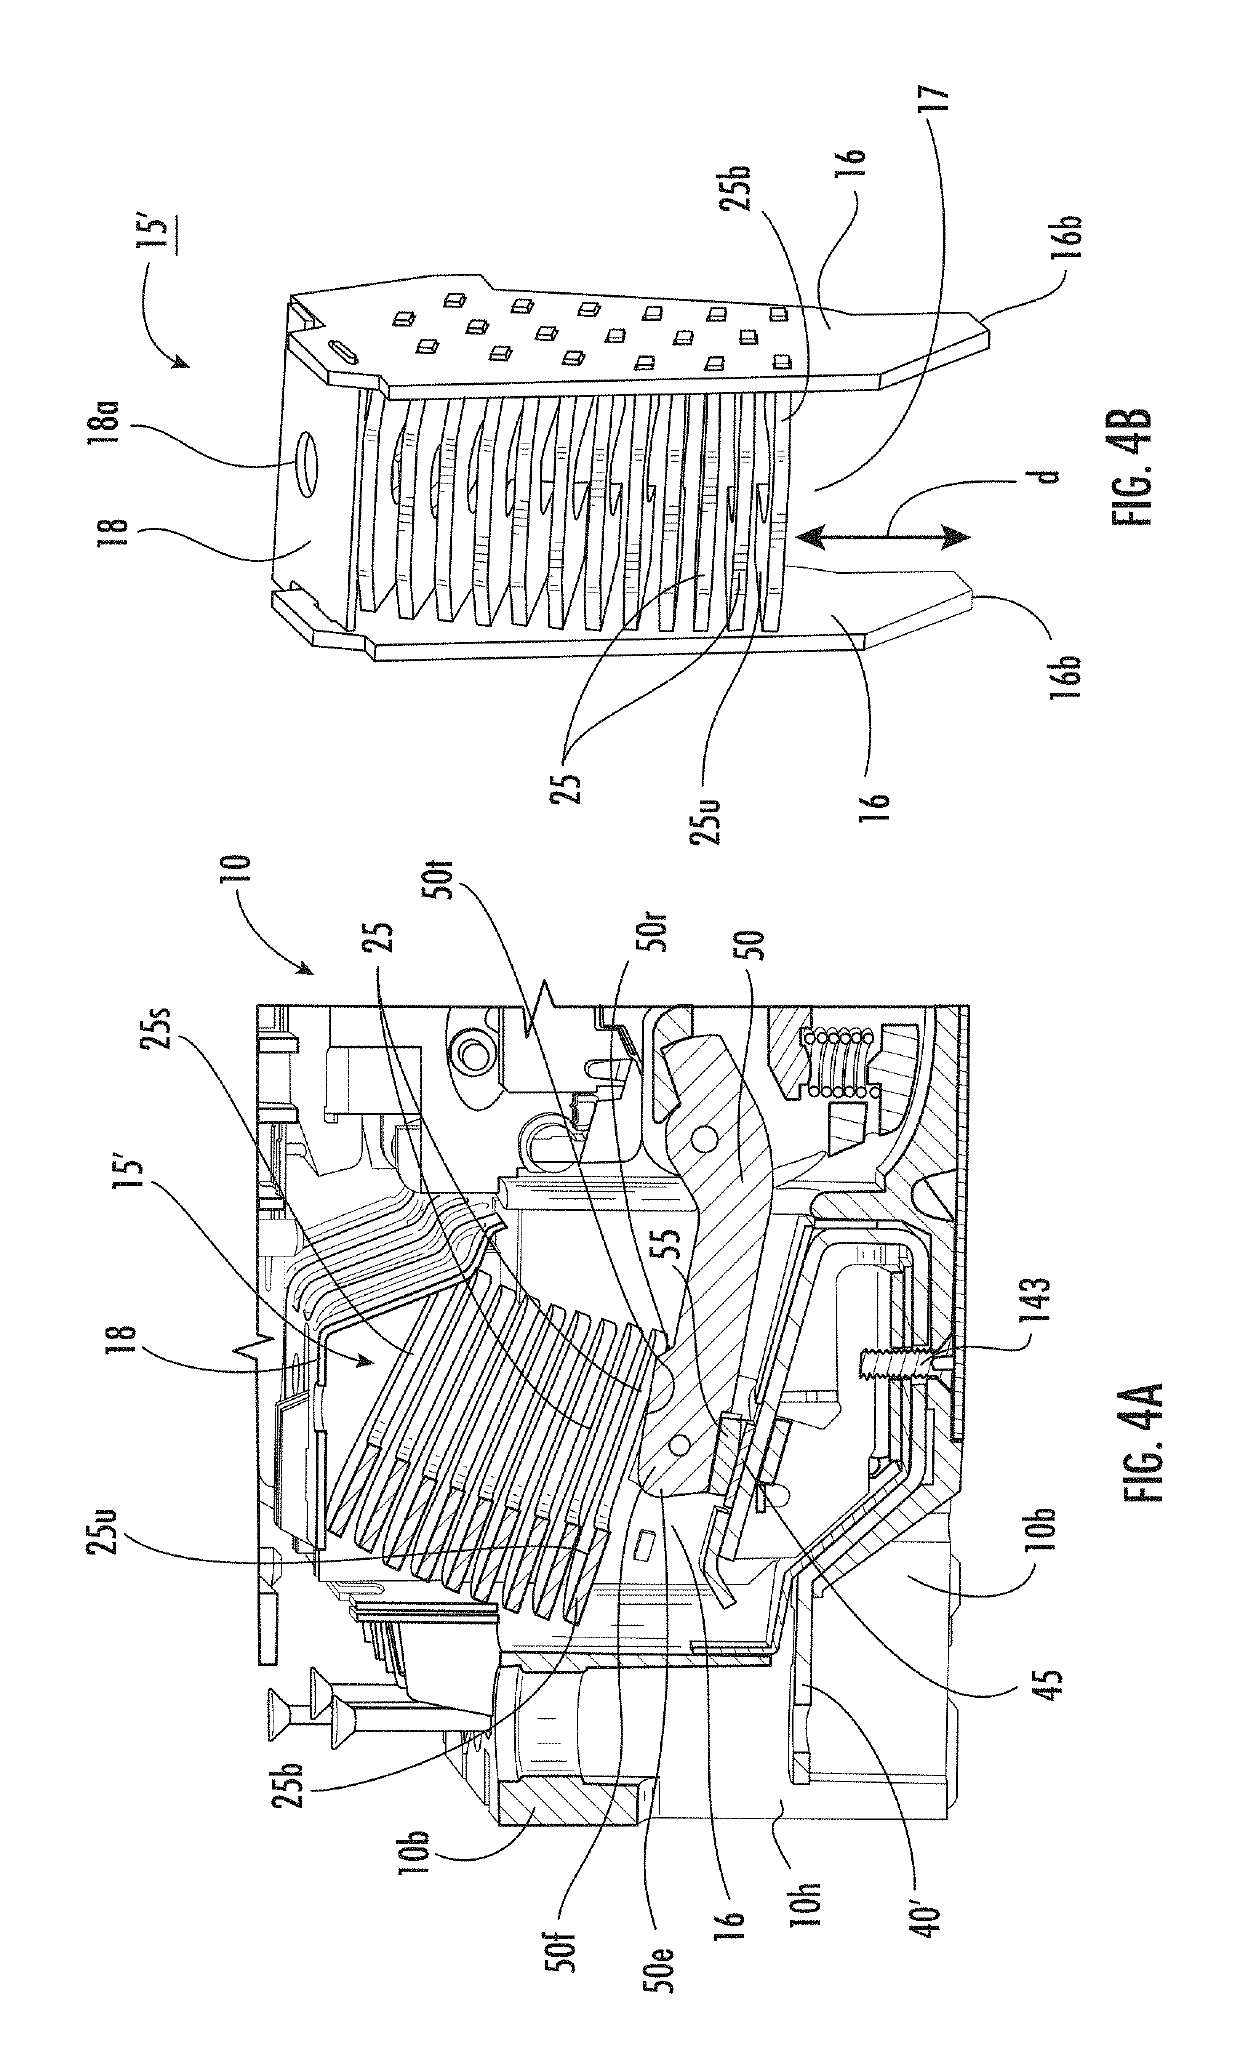 Switch disconnector systems suitable for molded case circuit breakers and related methods